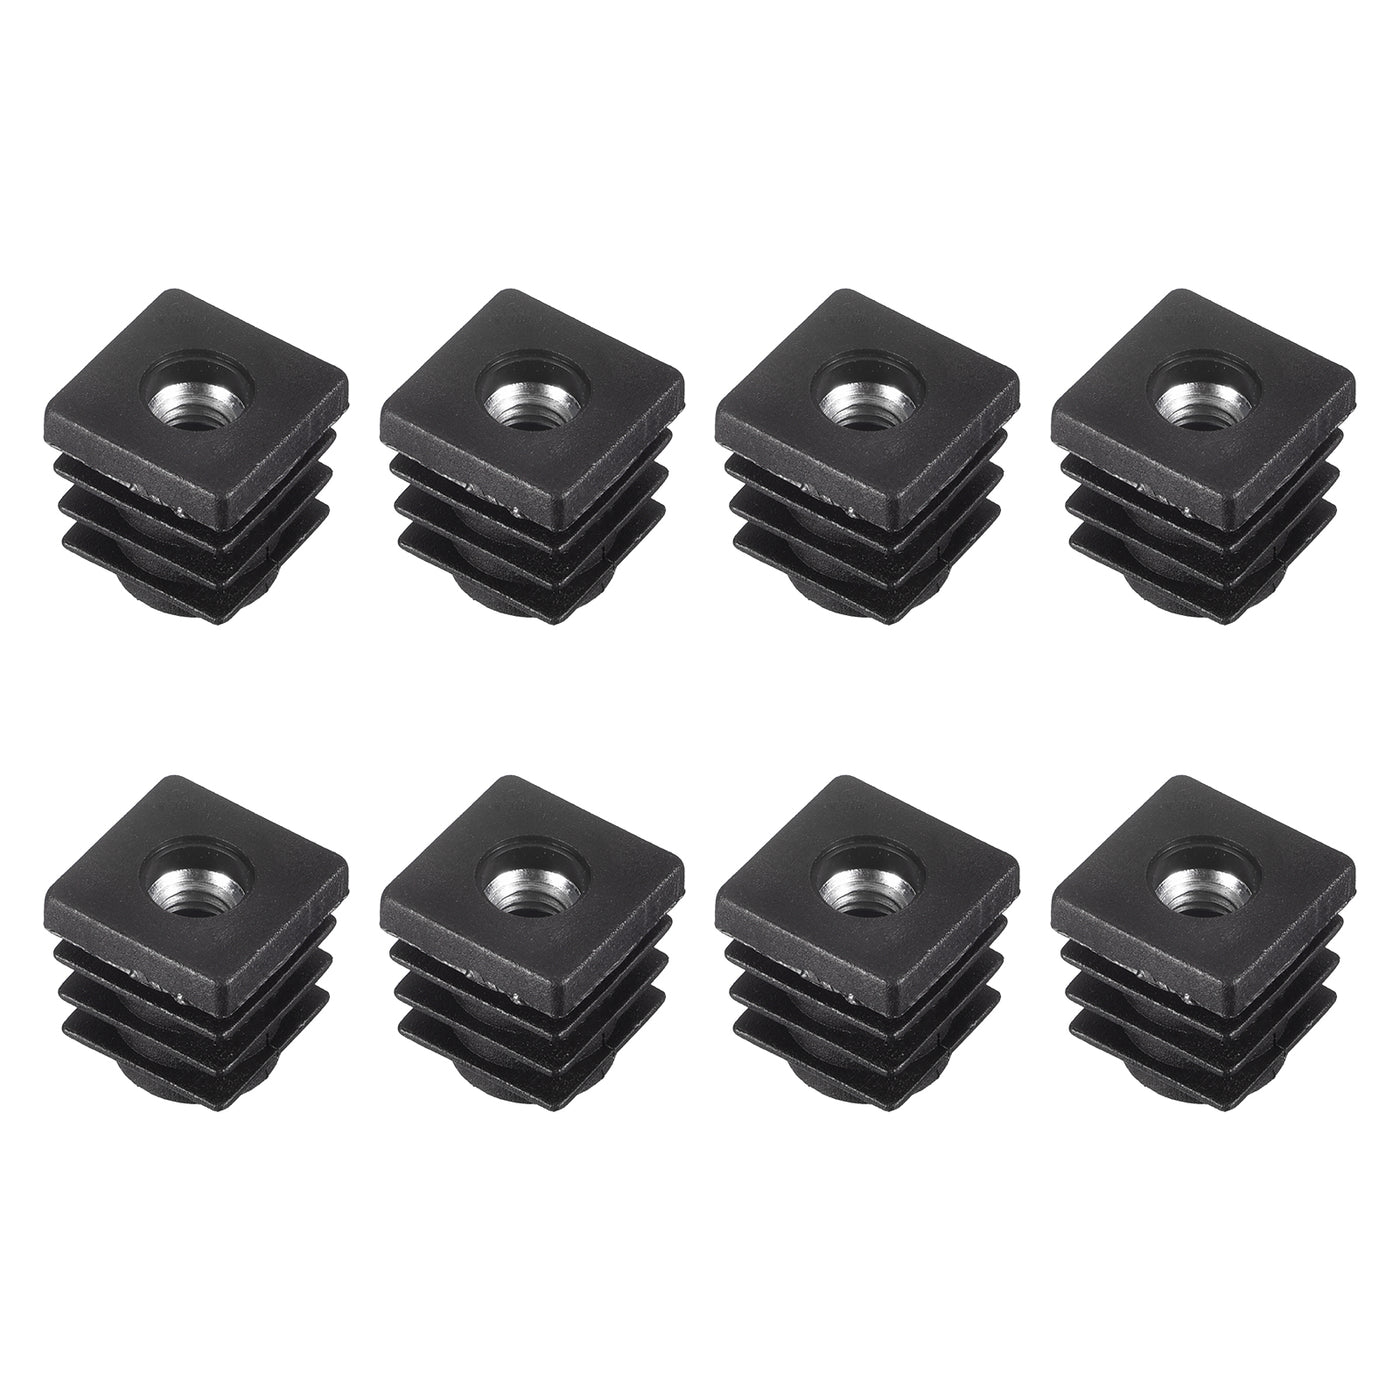 uxcell Uxcell 8Pcs 0.59"x0.59" Caster Insert with Thread, Square M6 Thread for Furniture